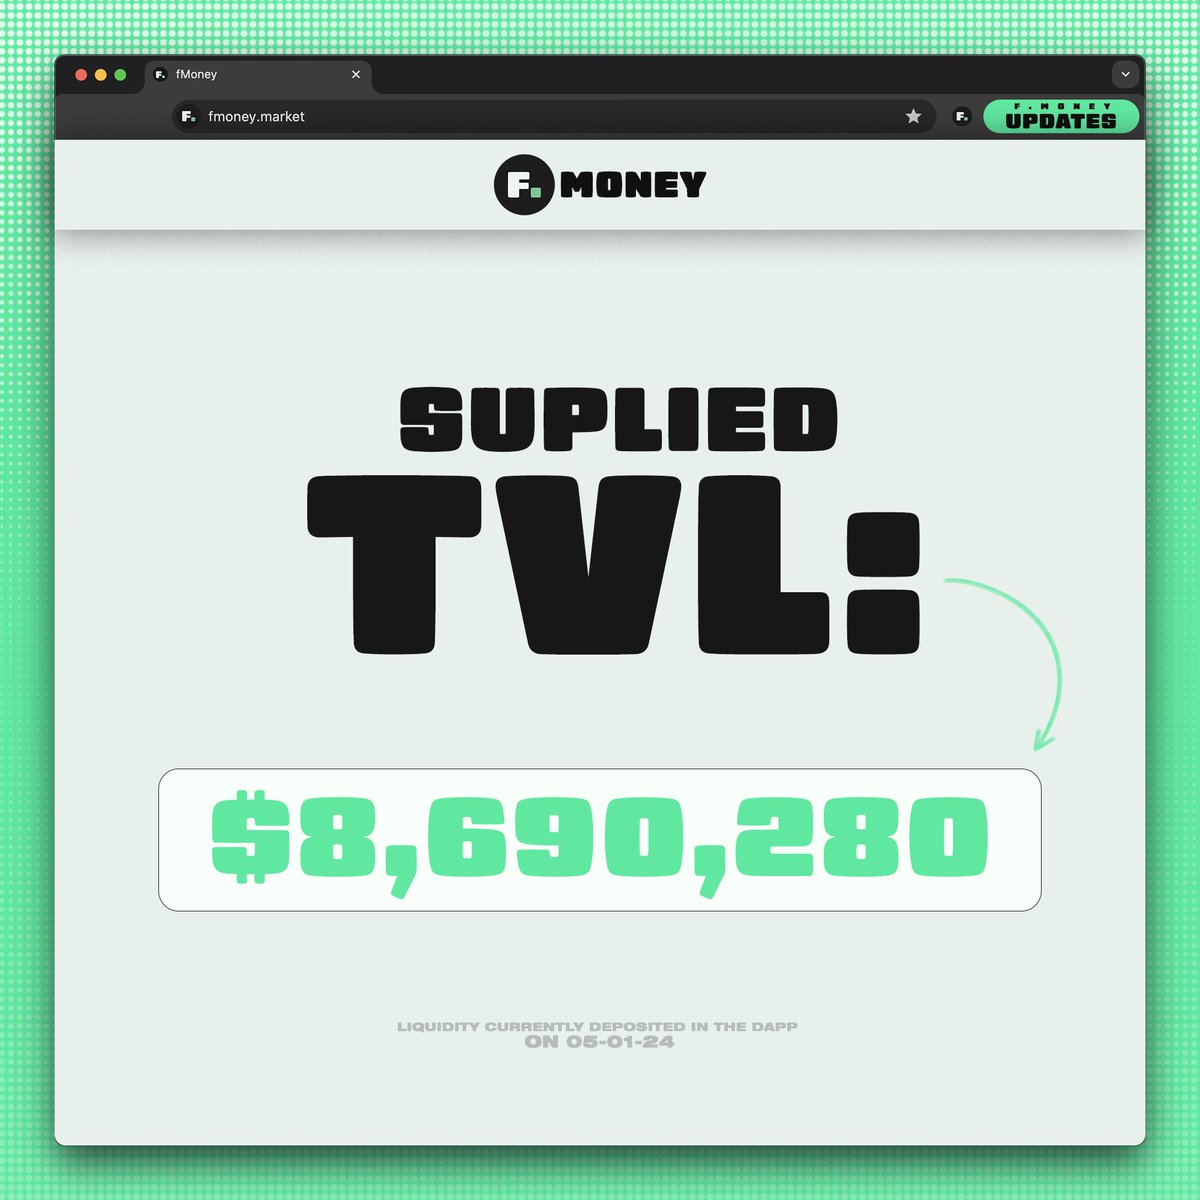 TVL keeps growing steadily👀 ✅ With the upcoming tokenomics improvements and a growing dapp, 🏗️ We are laying the foundation of fMoney🧱 $fBUX $FTM